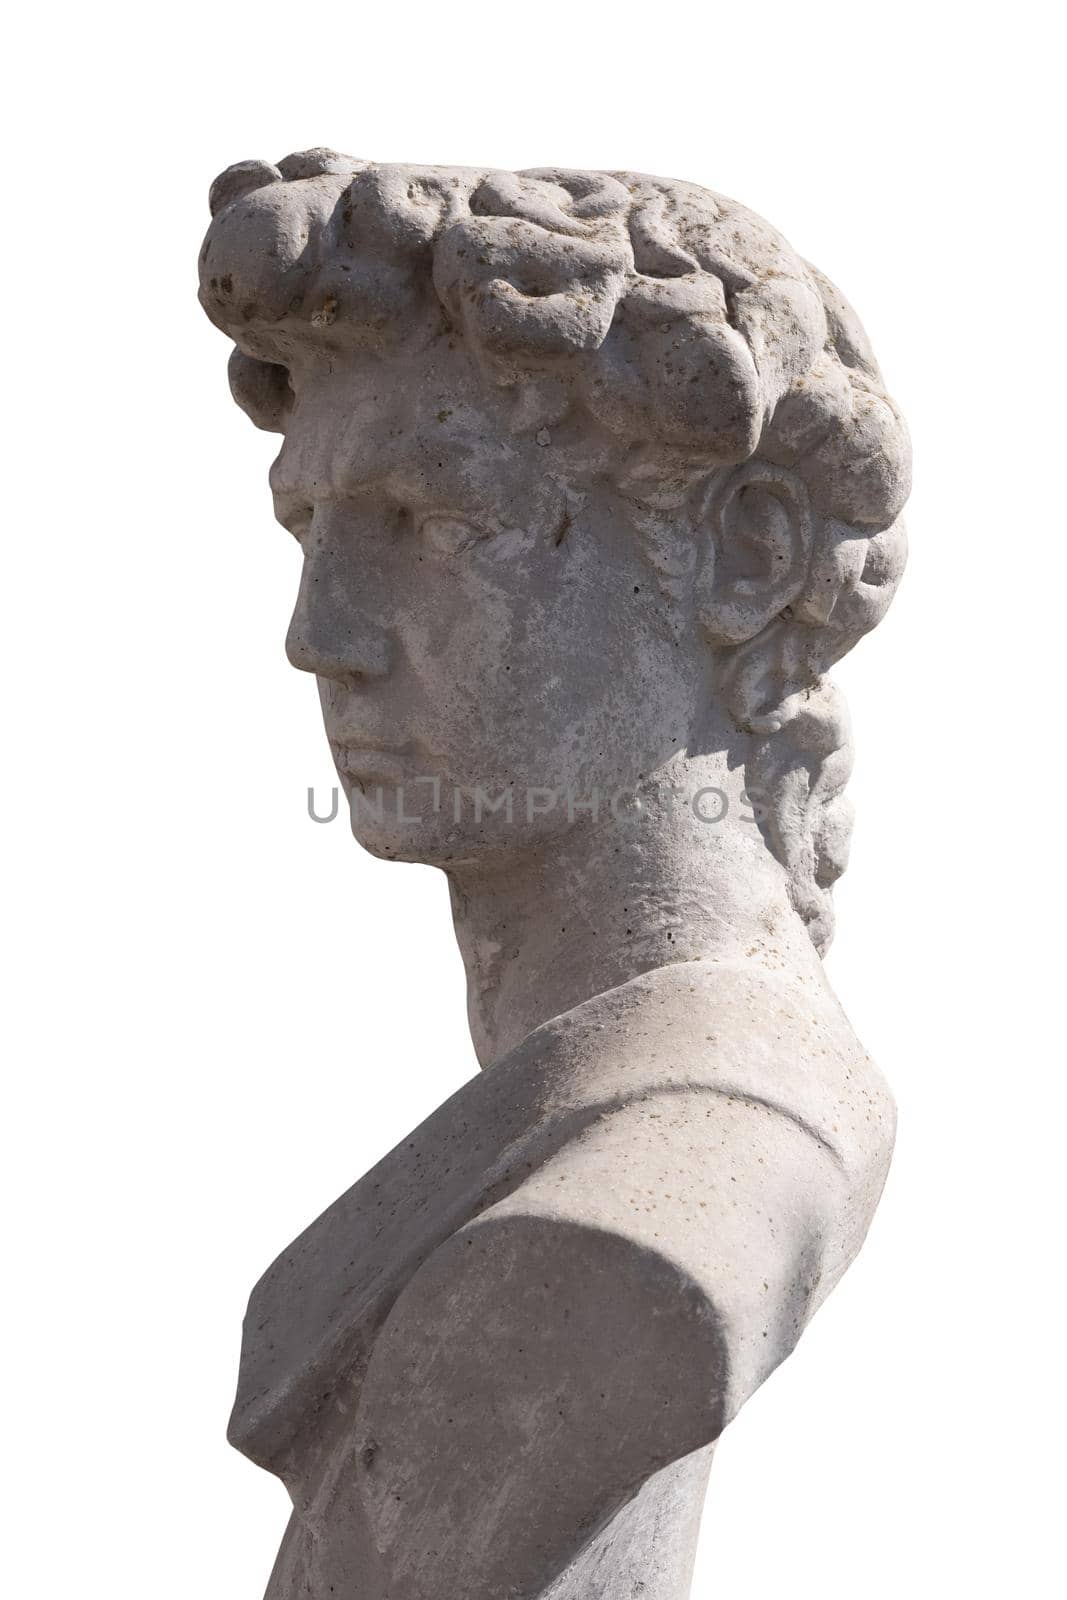 Close up side view of ancient stone sculpture of man's bust on white background. art and classical style romantic figurative stone sculpture.